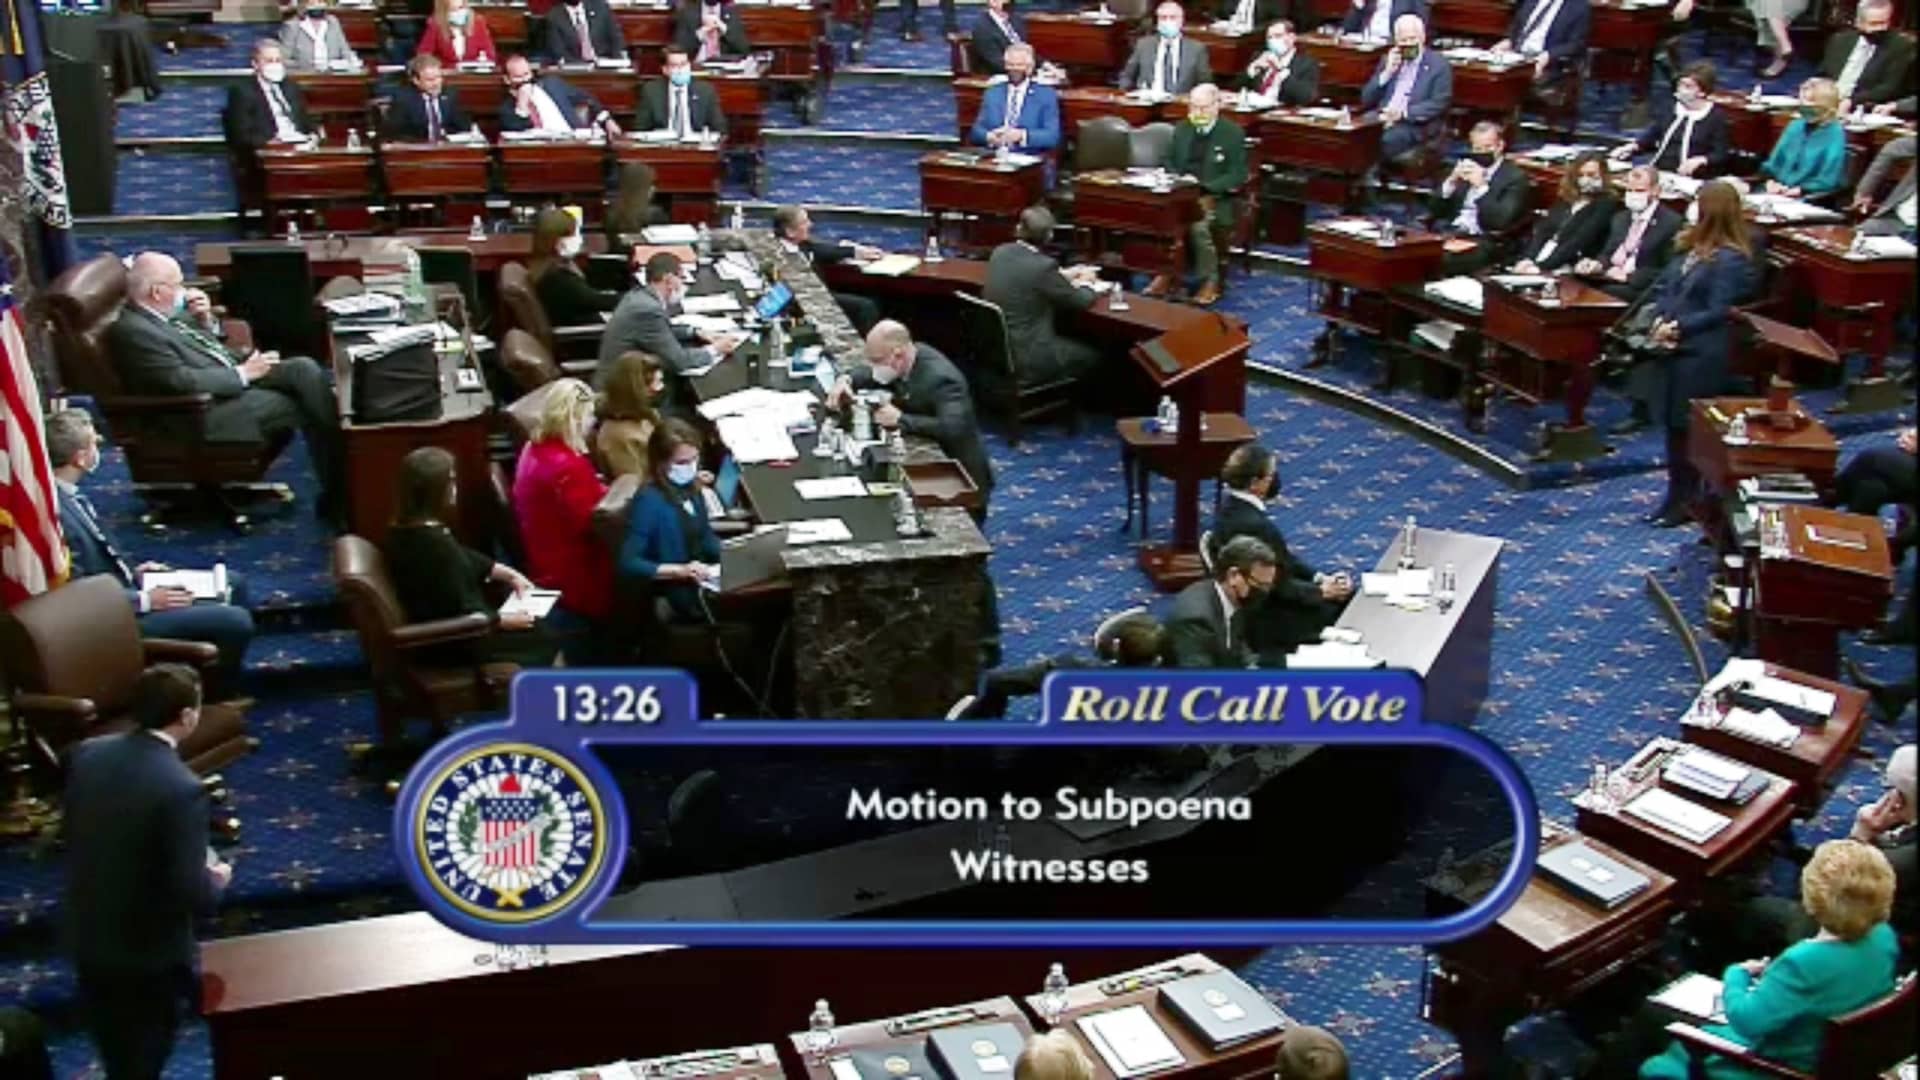 In this screenshot taken from a congress.gov webcast, a roll call vote is taken on a motion to subpoena witnesses on the fifth day of former President Donald Trump's second impeachment trial at the U.S. Capitol on February 13, 2021 in Washington, DC.